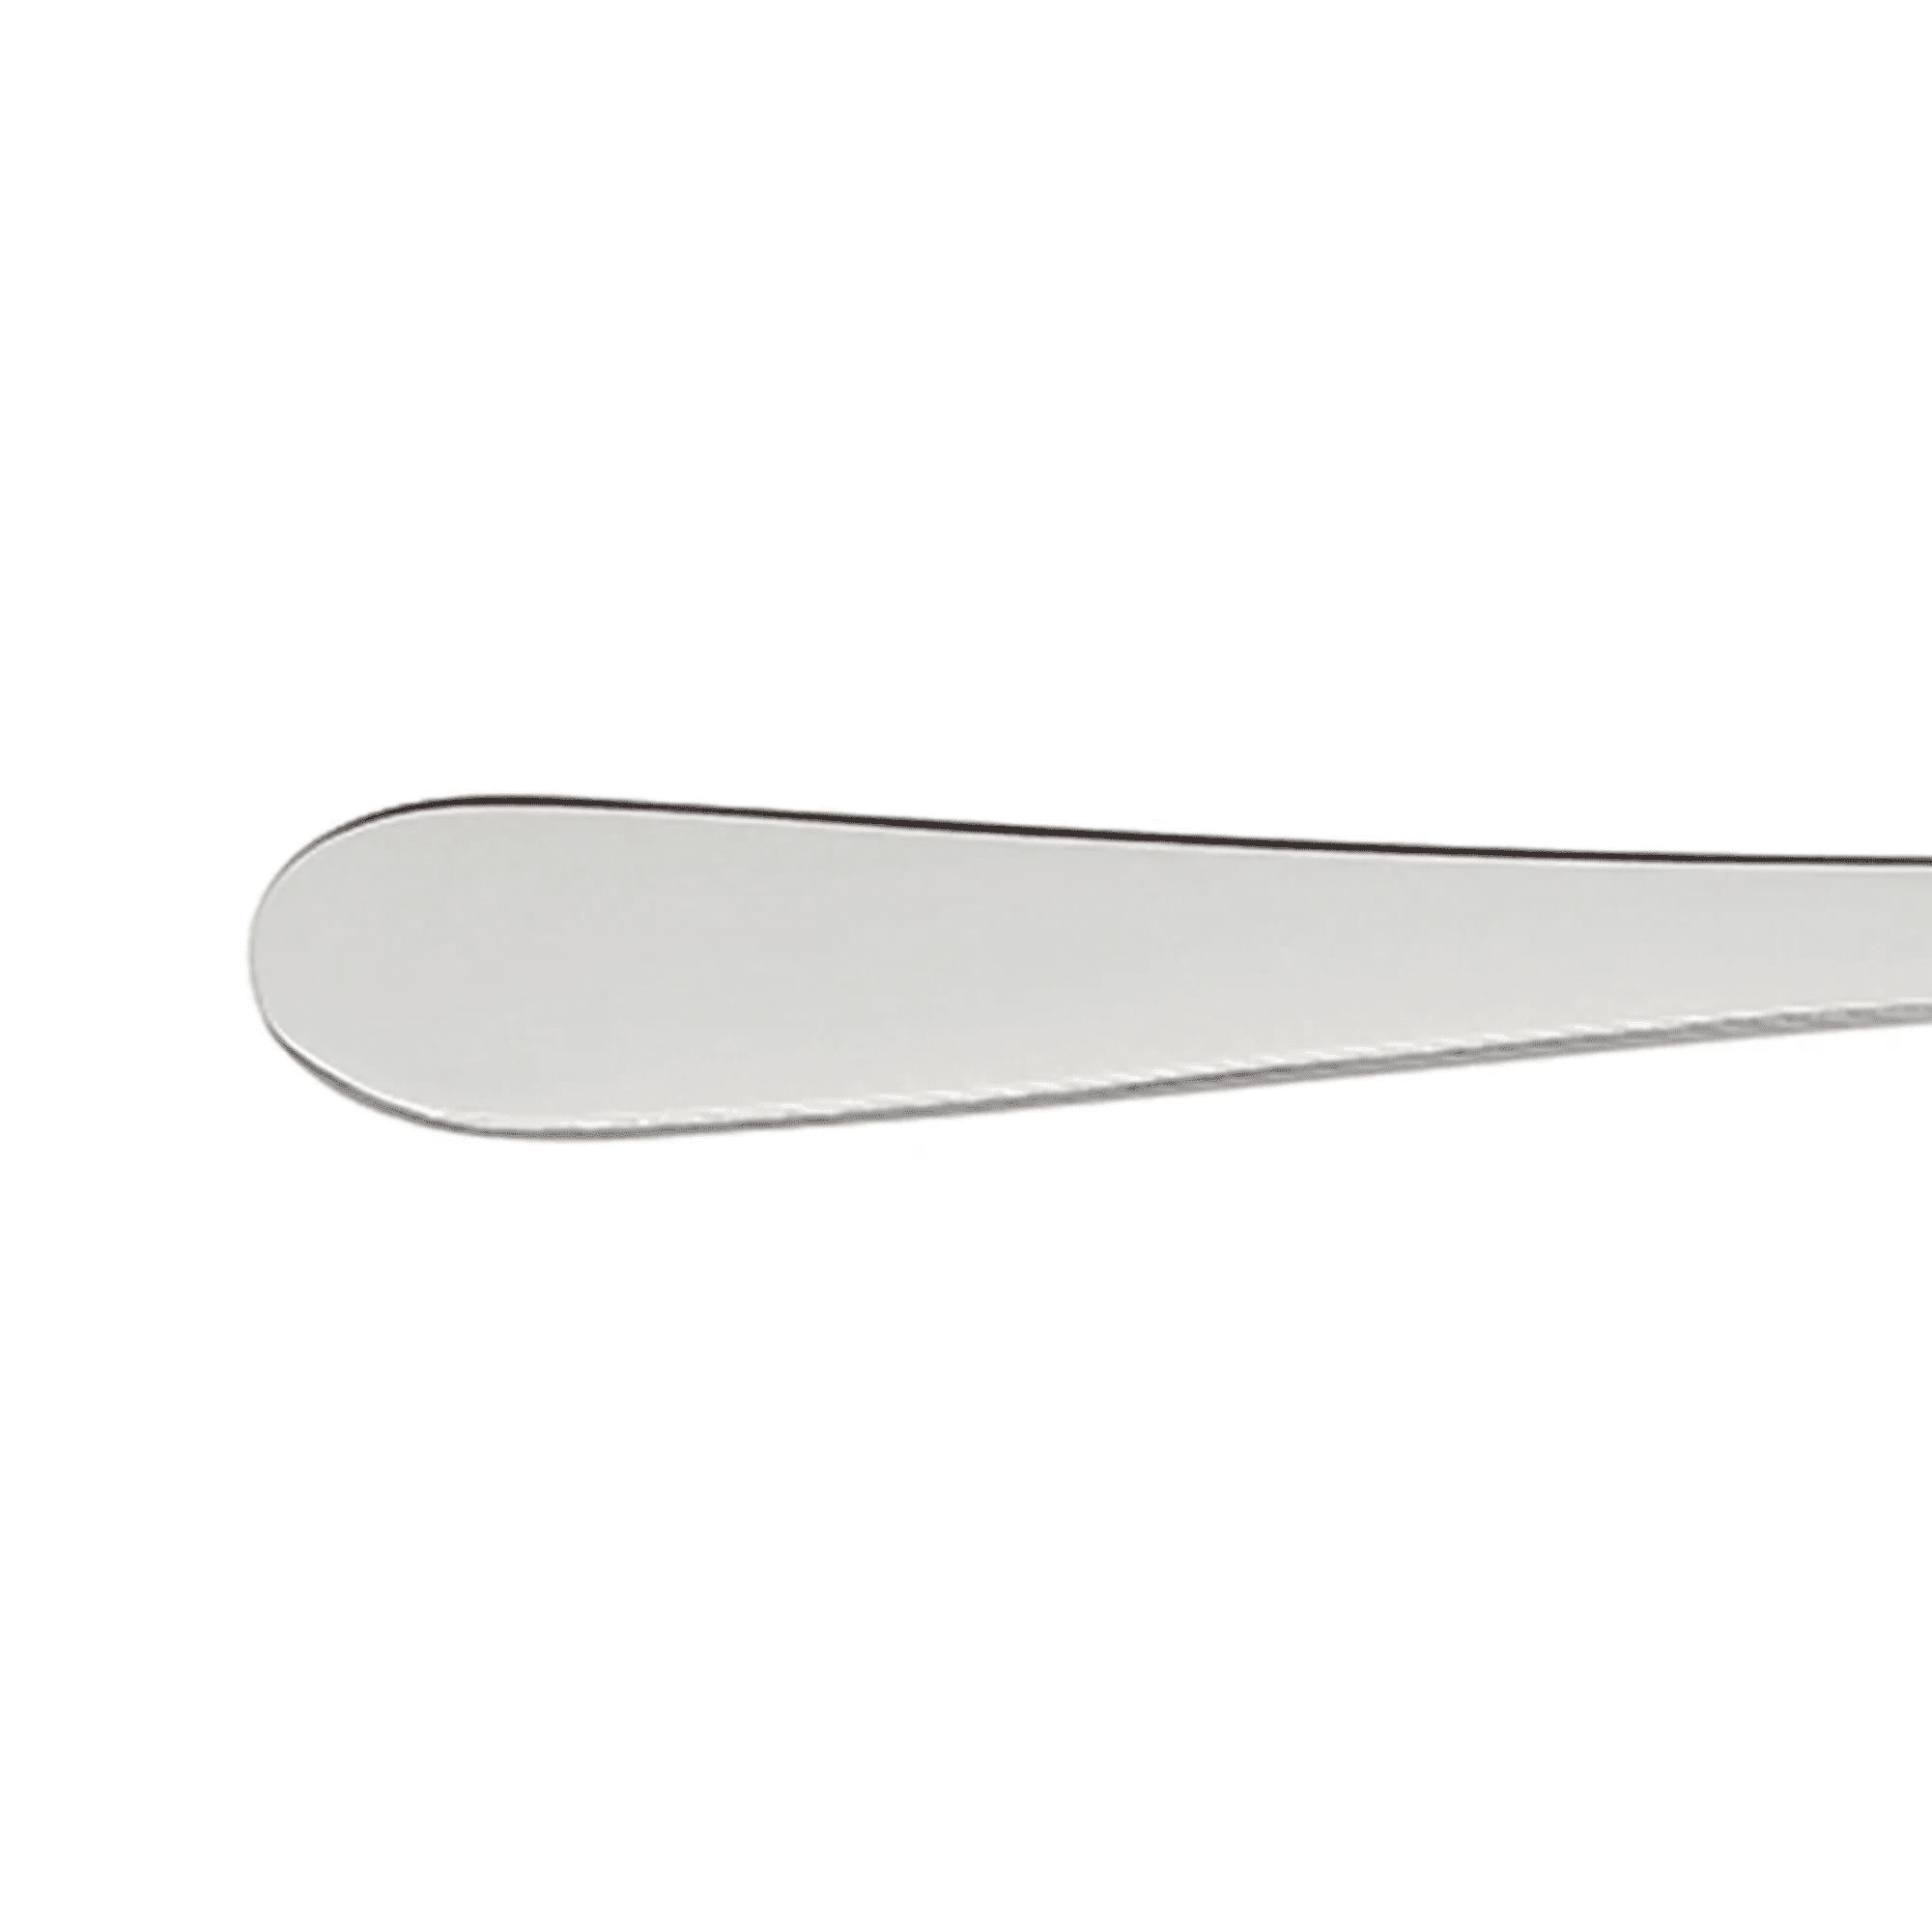 Stanley Rogers Albany Cake Knife Image 3